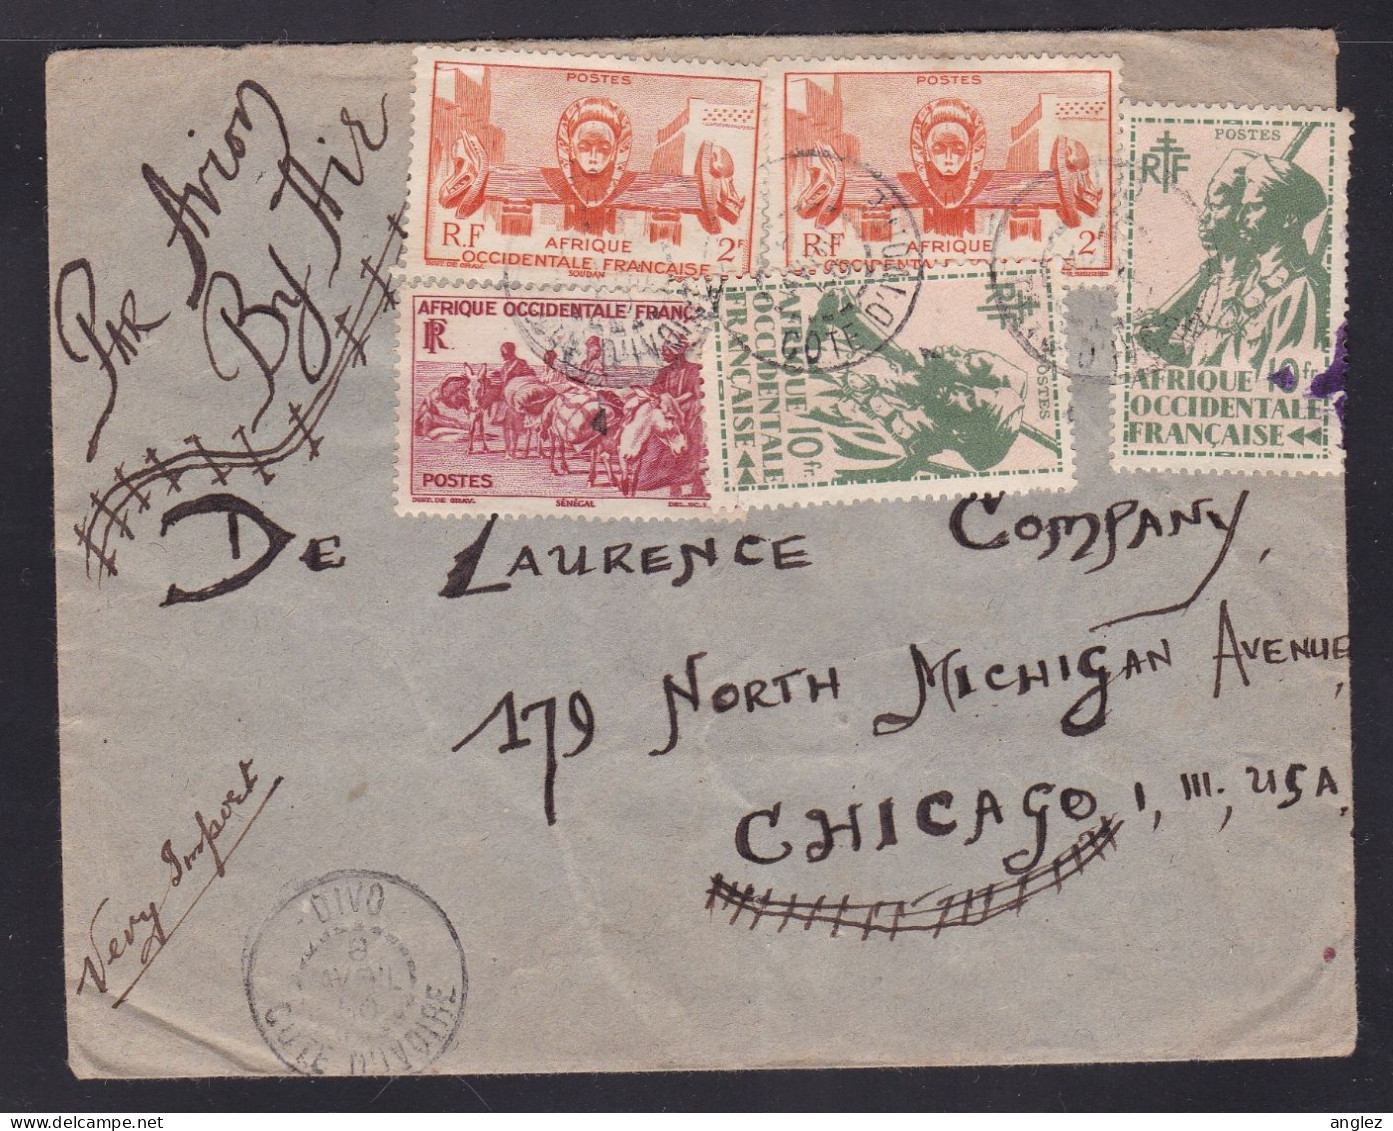 France / AOF / Cote D'Ivoire / Ivory Coast - 1950 Airmail Cover Divo To Chicago USA - Covers & Documents